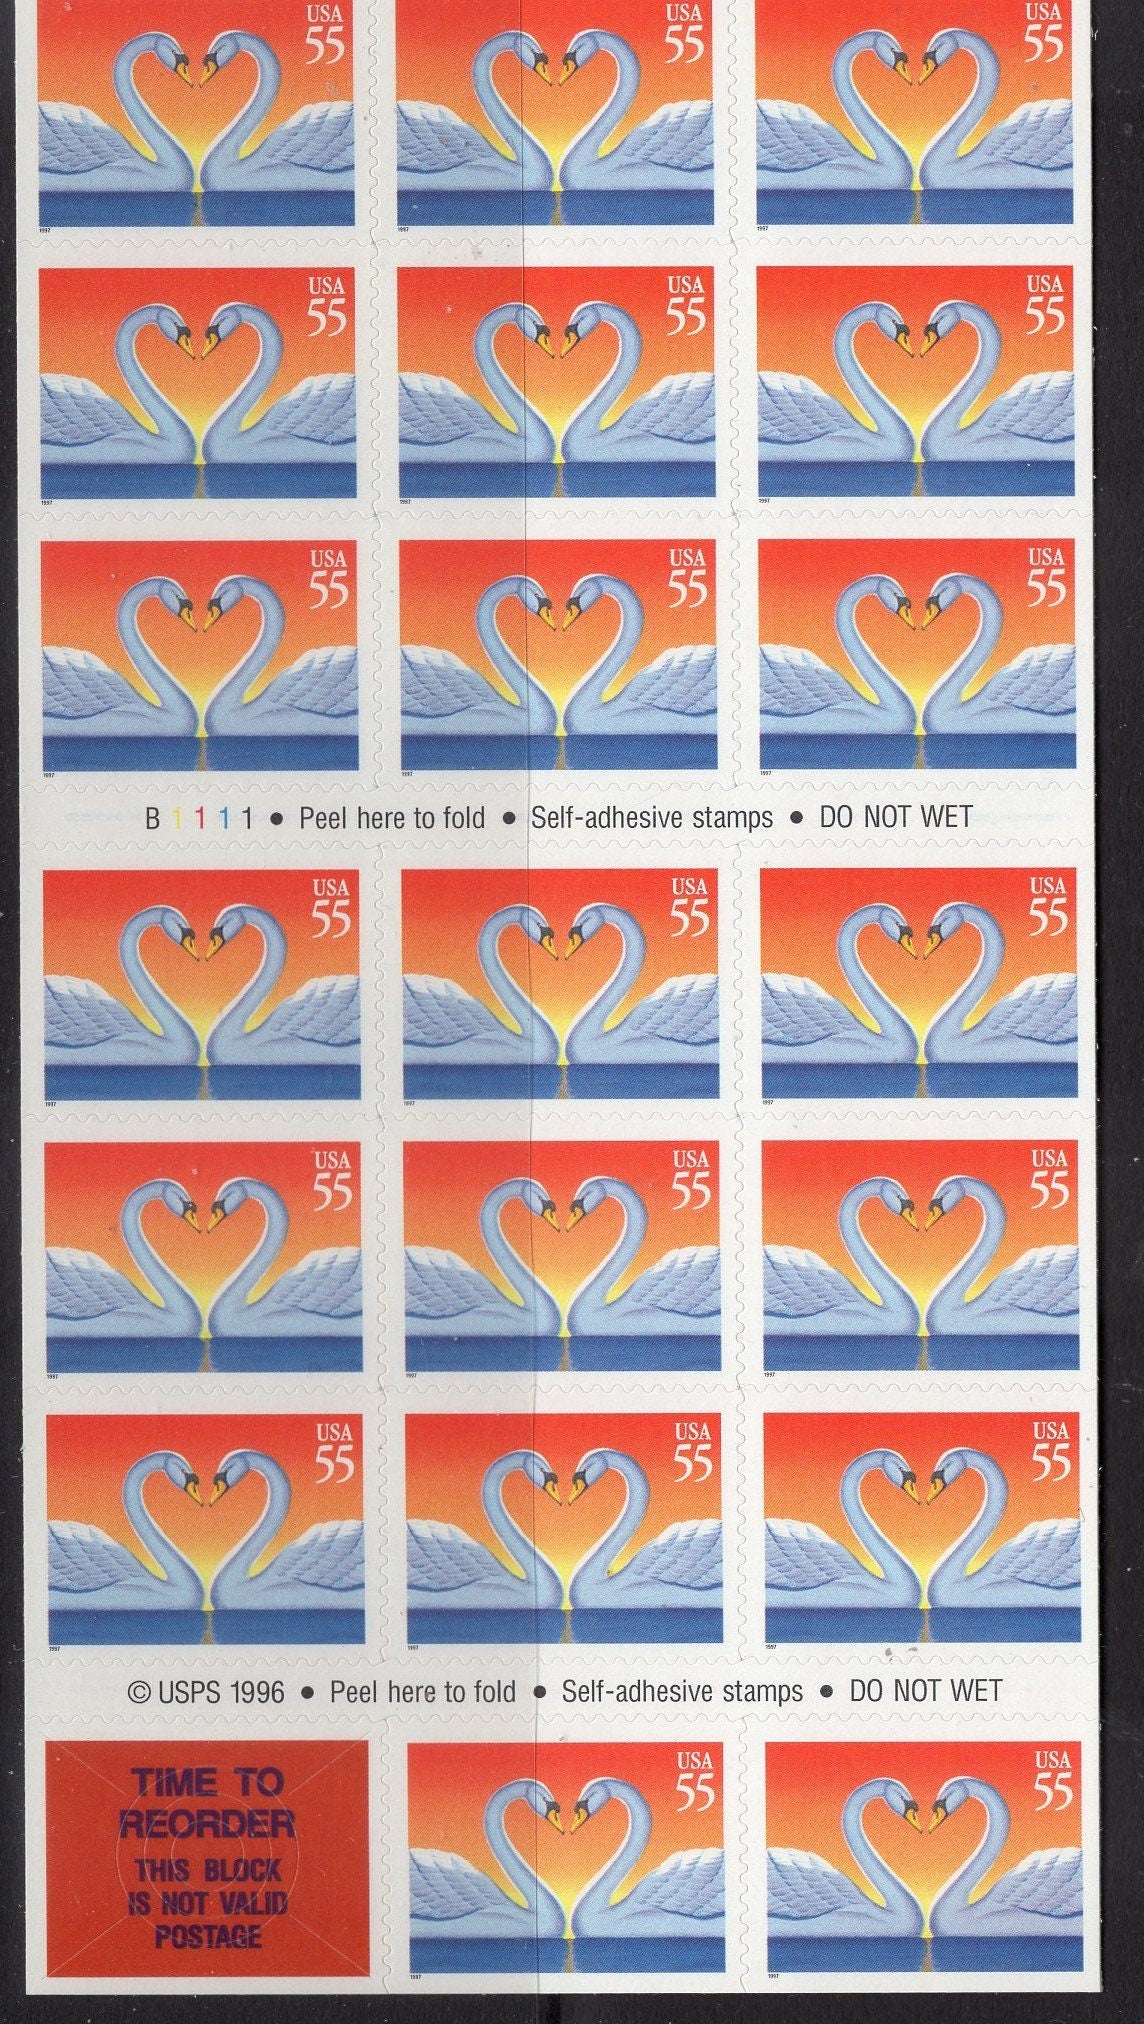 20 SWANS CREATING a LOVE Heart - Wedding Invitations 55c Self-adhesive Fresh Unused USA Postage Stamps - Issued in 2002 s3561